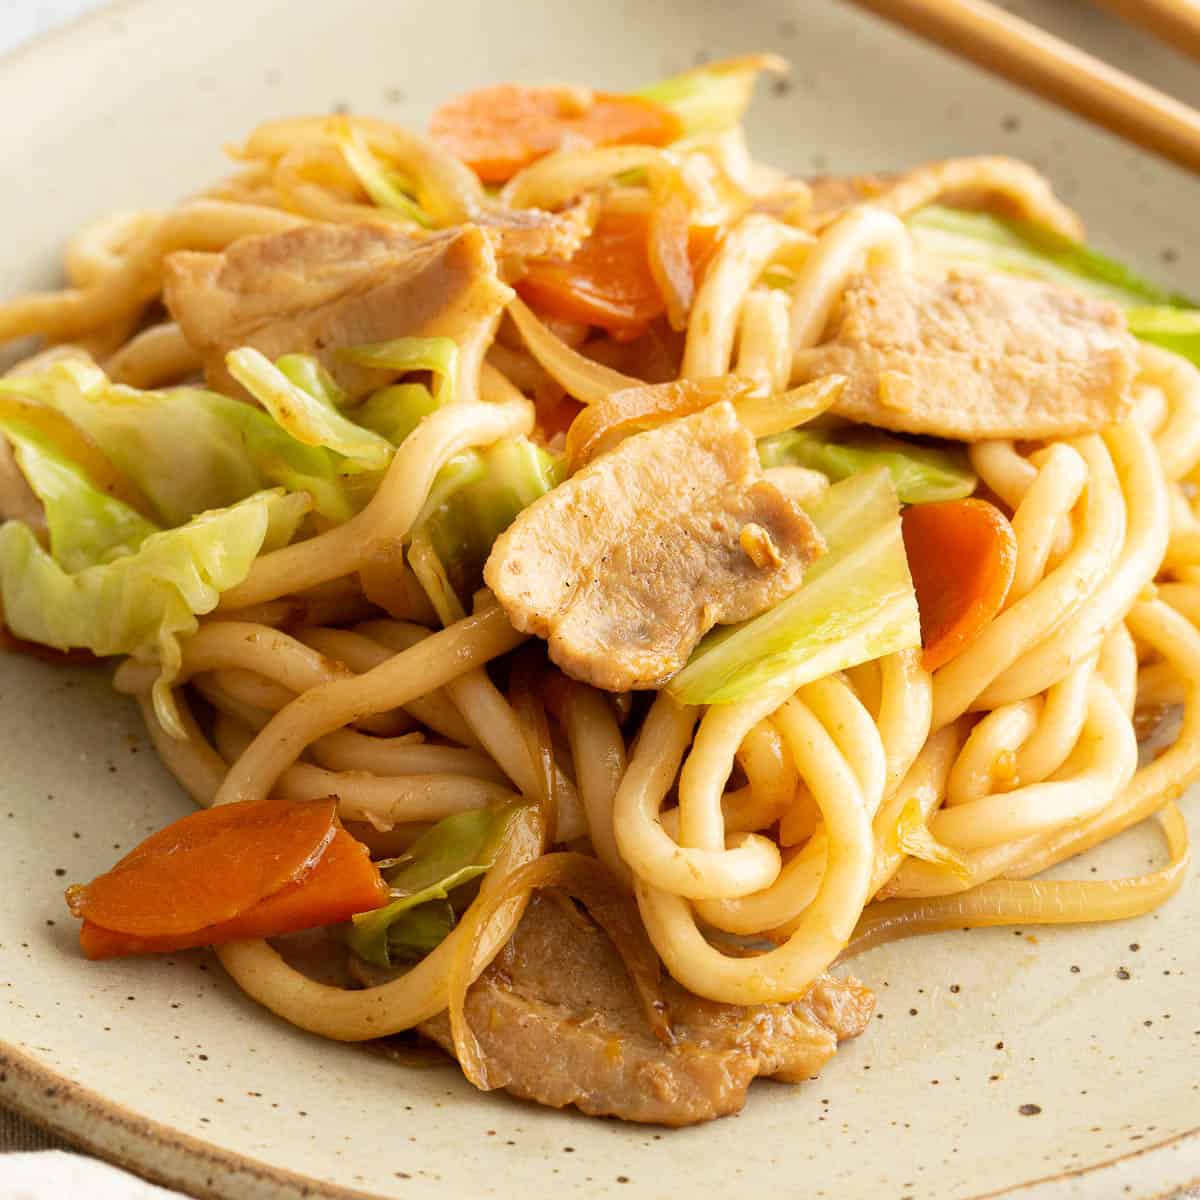 A plate of yaki udon showing the pork and vegetables.